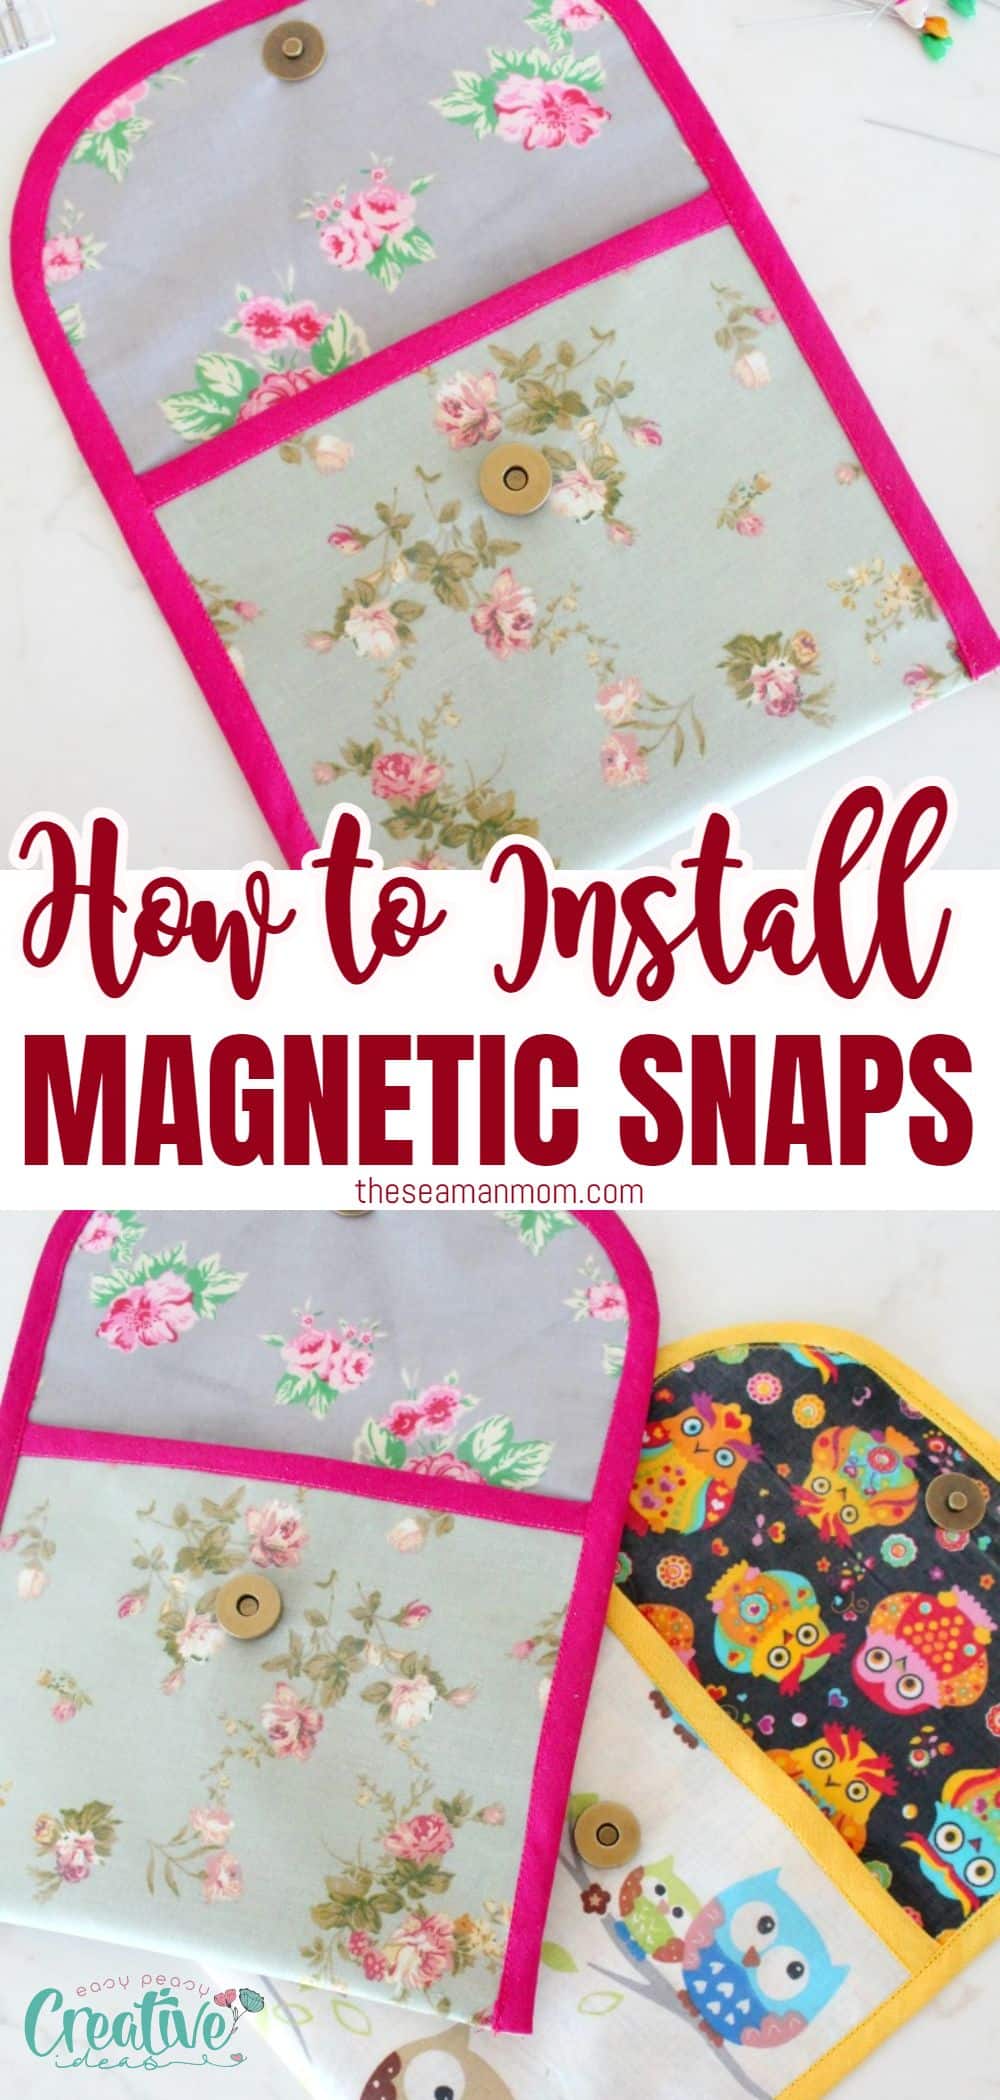 Are the instructions for your sewing pattern unclear about how to install magnetic snaps? Don't worry! This tutorial will provide you with a simple and straightforward guide on how to install magnetic snaps on any sewing project. via @petroneagu